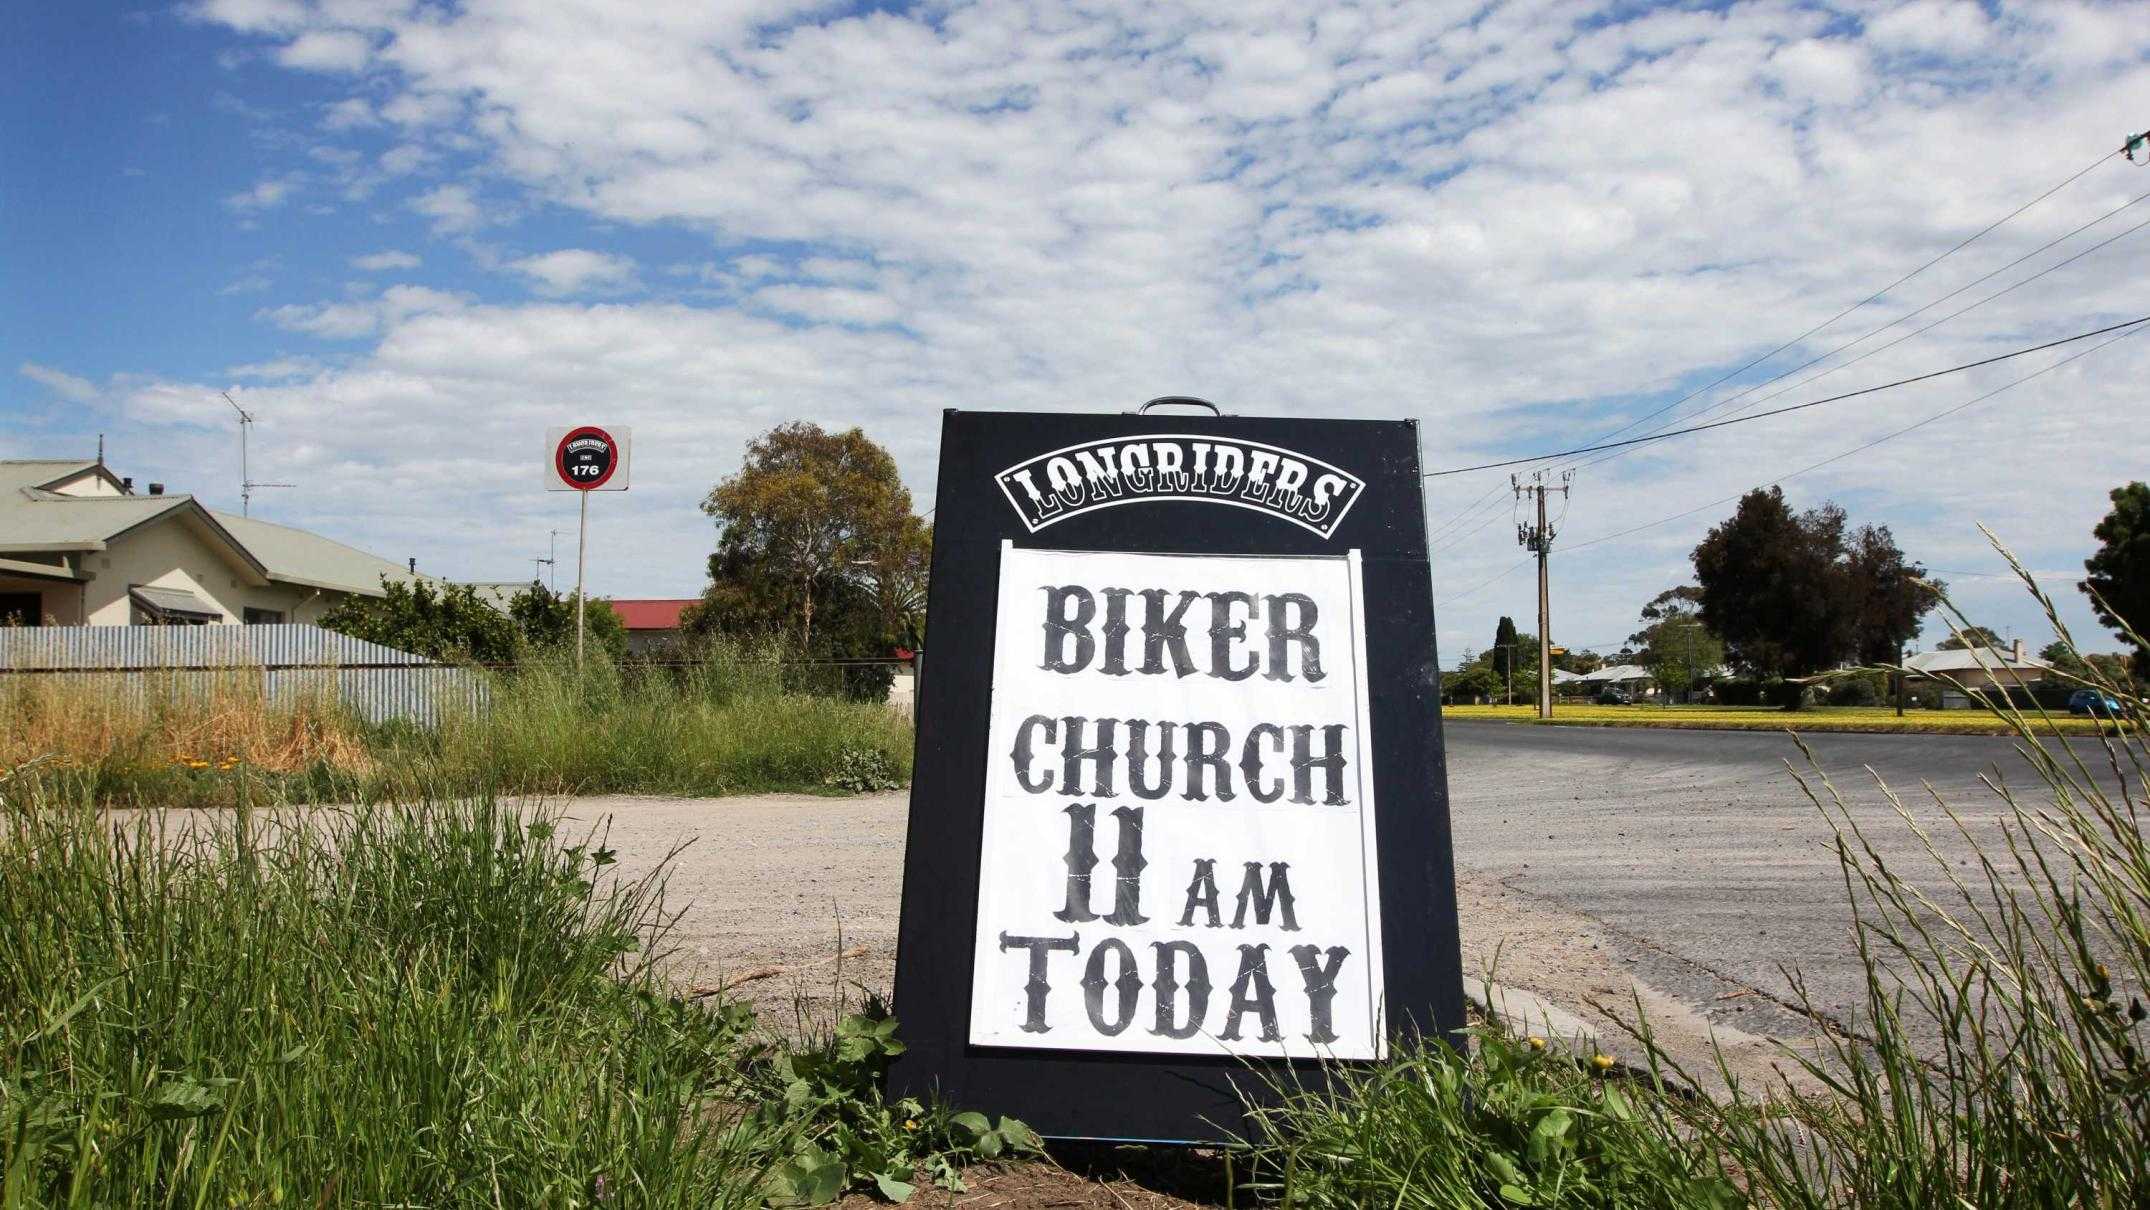 Cane toads Video Worksheet Answers and Biker Church An Unconventional House Of God Abc News Australian